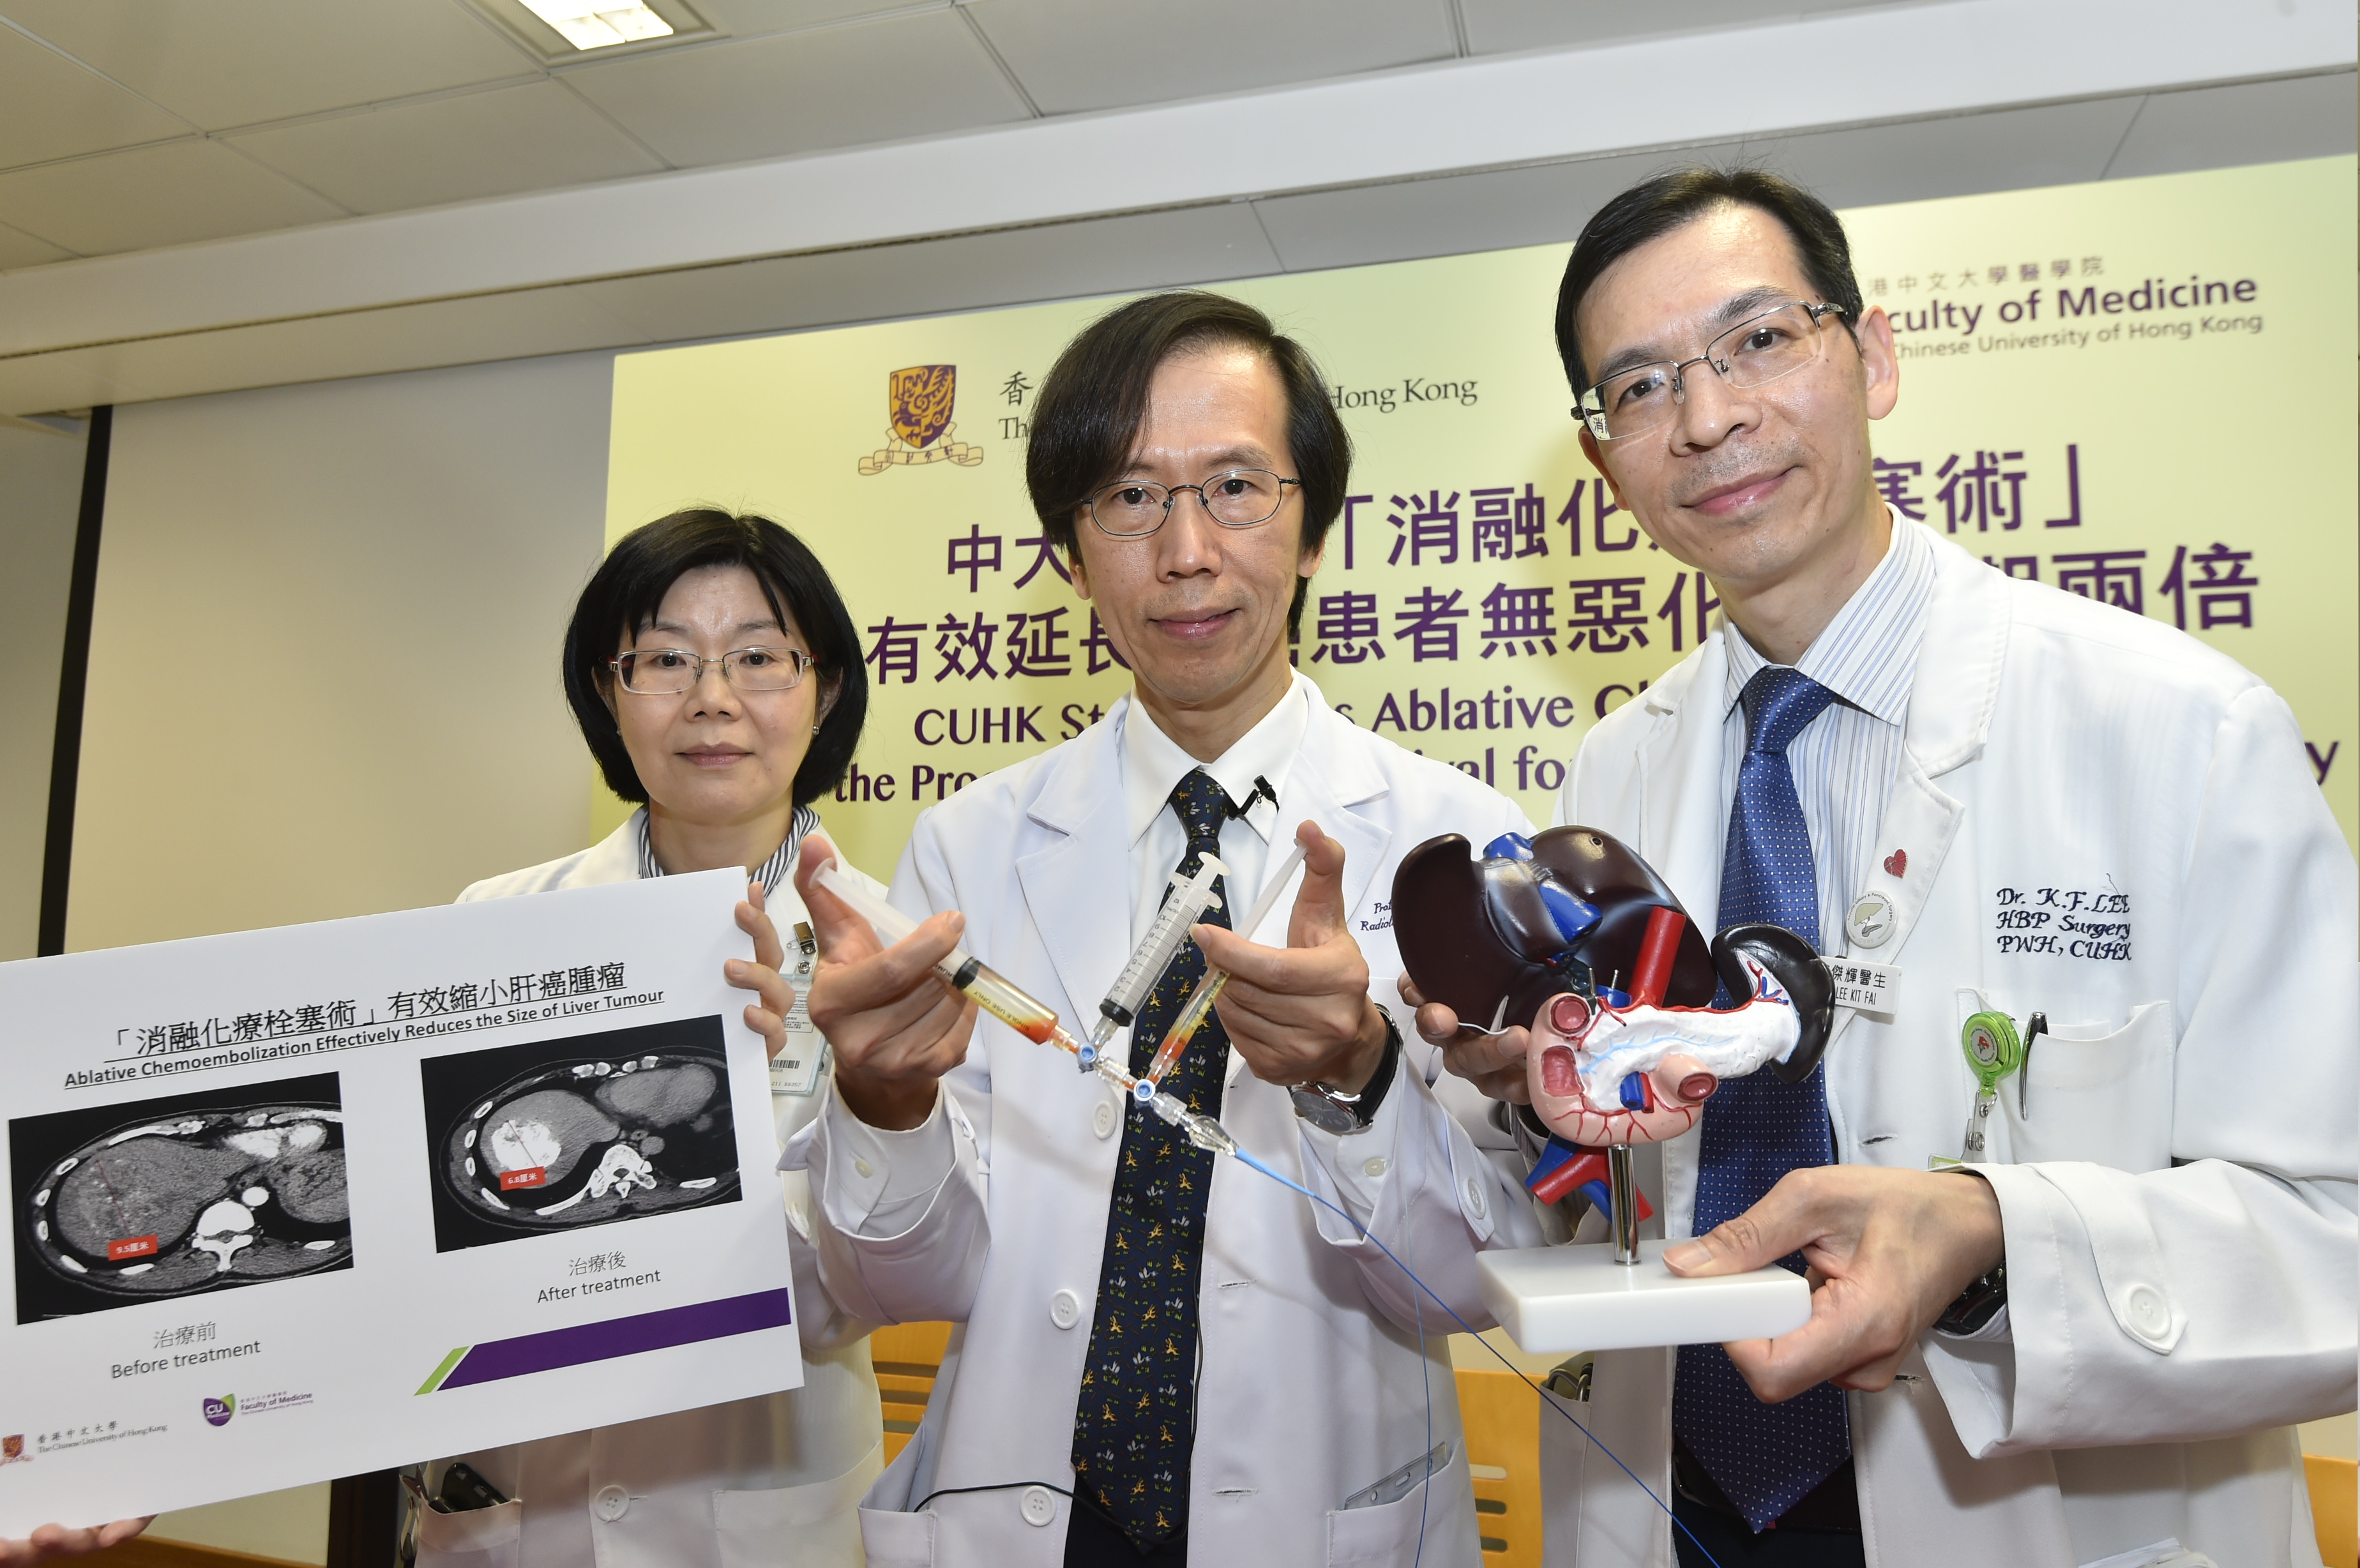 From left: Prof. Winnie YEO, Professor of the Department of Clinical Oncology; Prof. Simon YU, Chairman of the Department of Imaging and Interventional Radiology; Dr. Kit Fai LEE, Clinical Associate Professor (honorary) of the Department of Surgery, from the Faculty of Medicine at CUHK